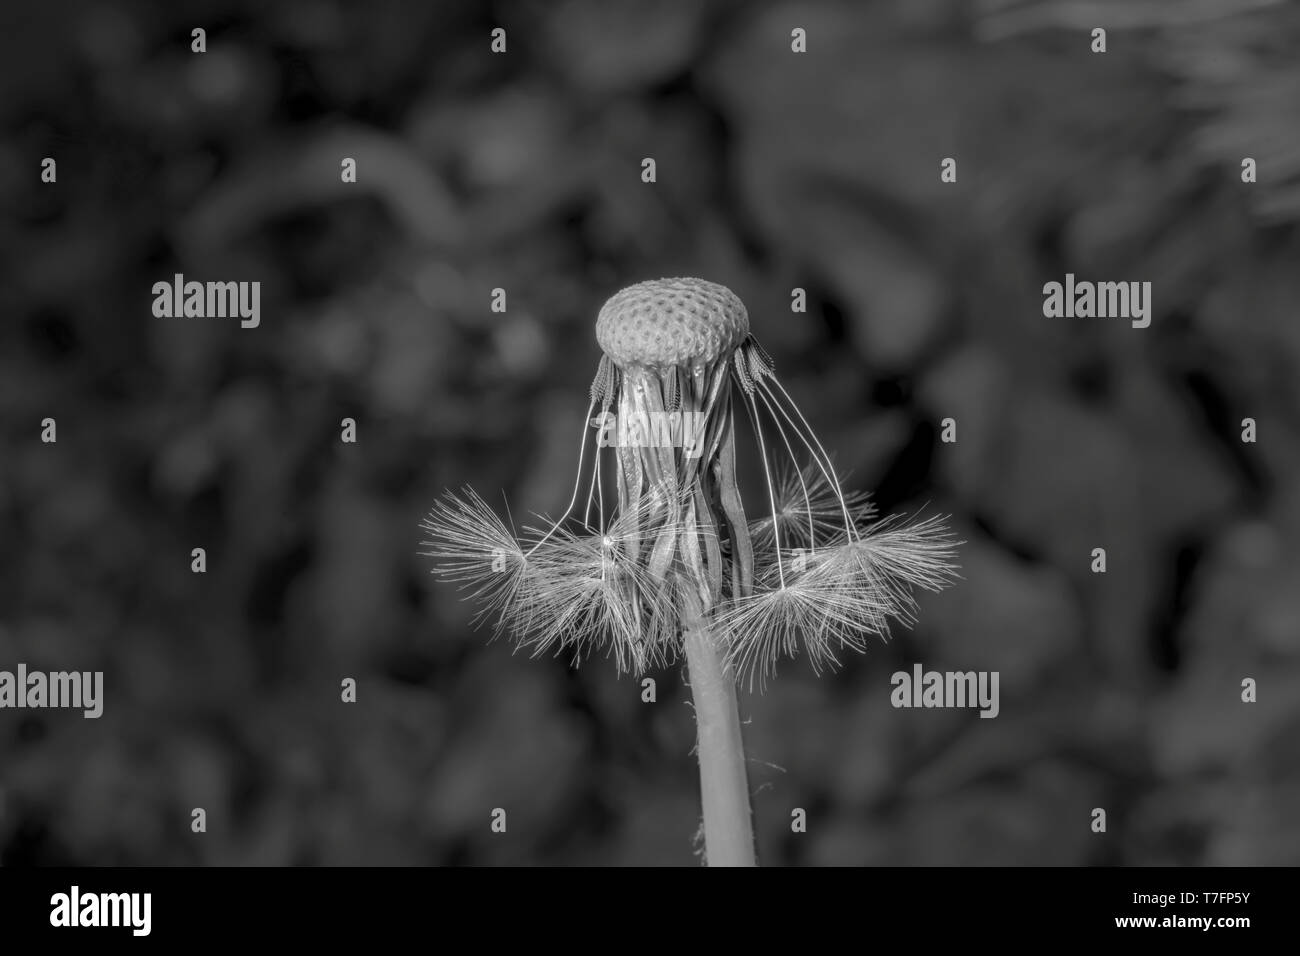 Ripe dandelion Seed Blossom in front of soft blurred green background monochrom Stock Photo